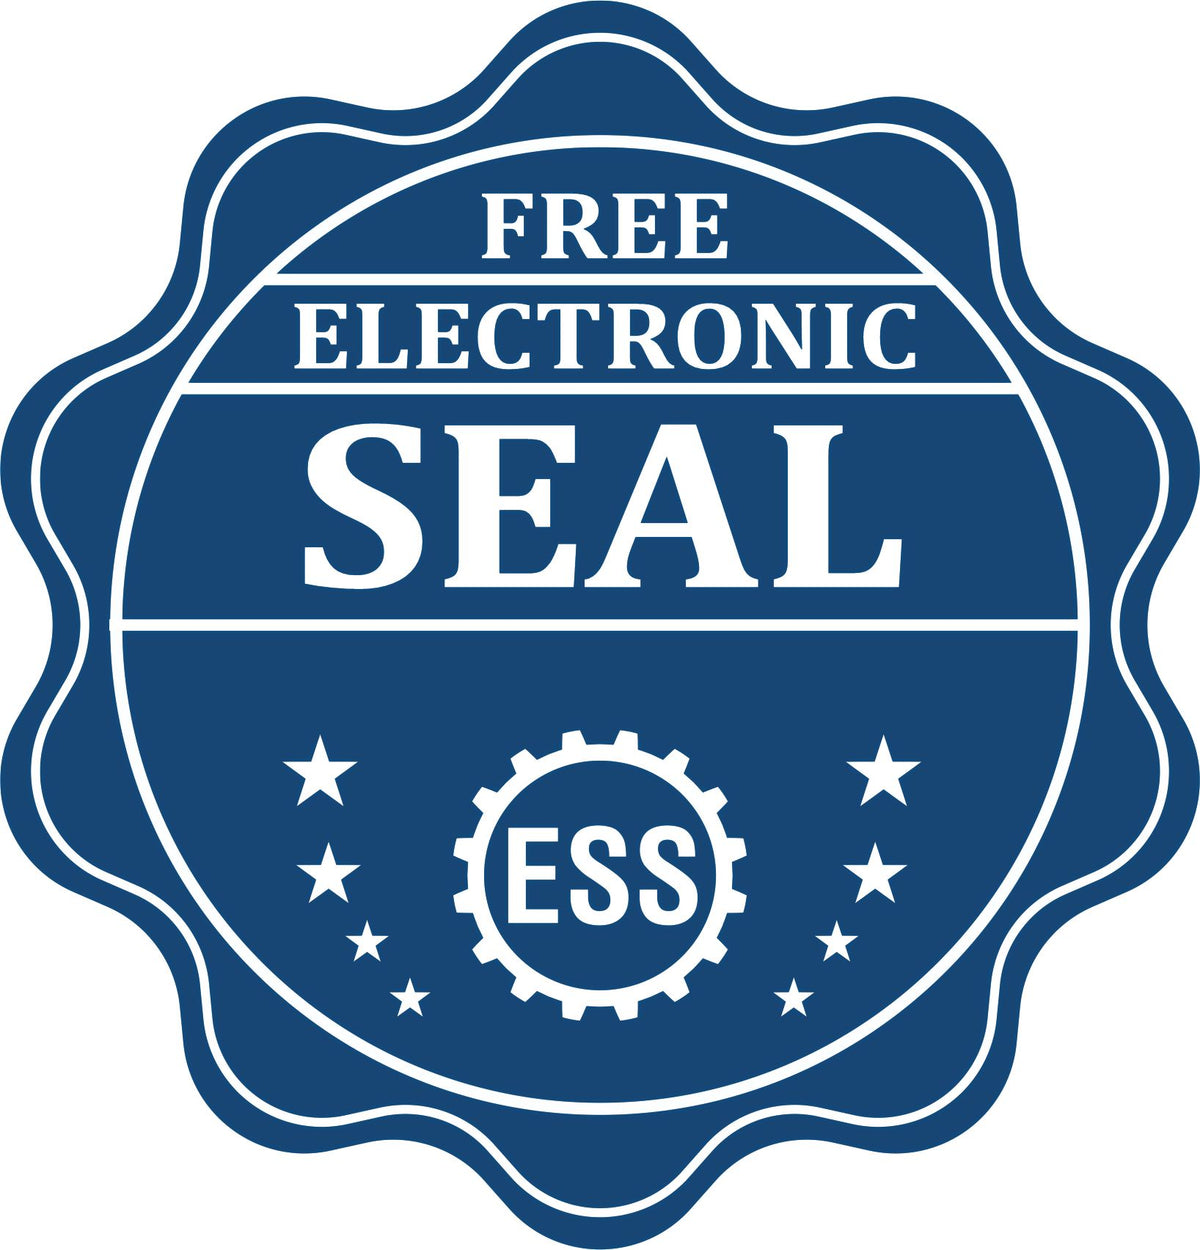 A badge showing a free electronic seal for the Super Slim Idaho Notary Public Stamp with stars and the ESS gear on the emblem.